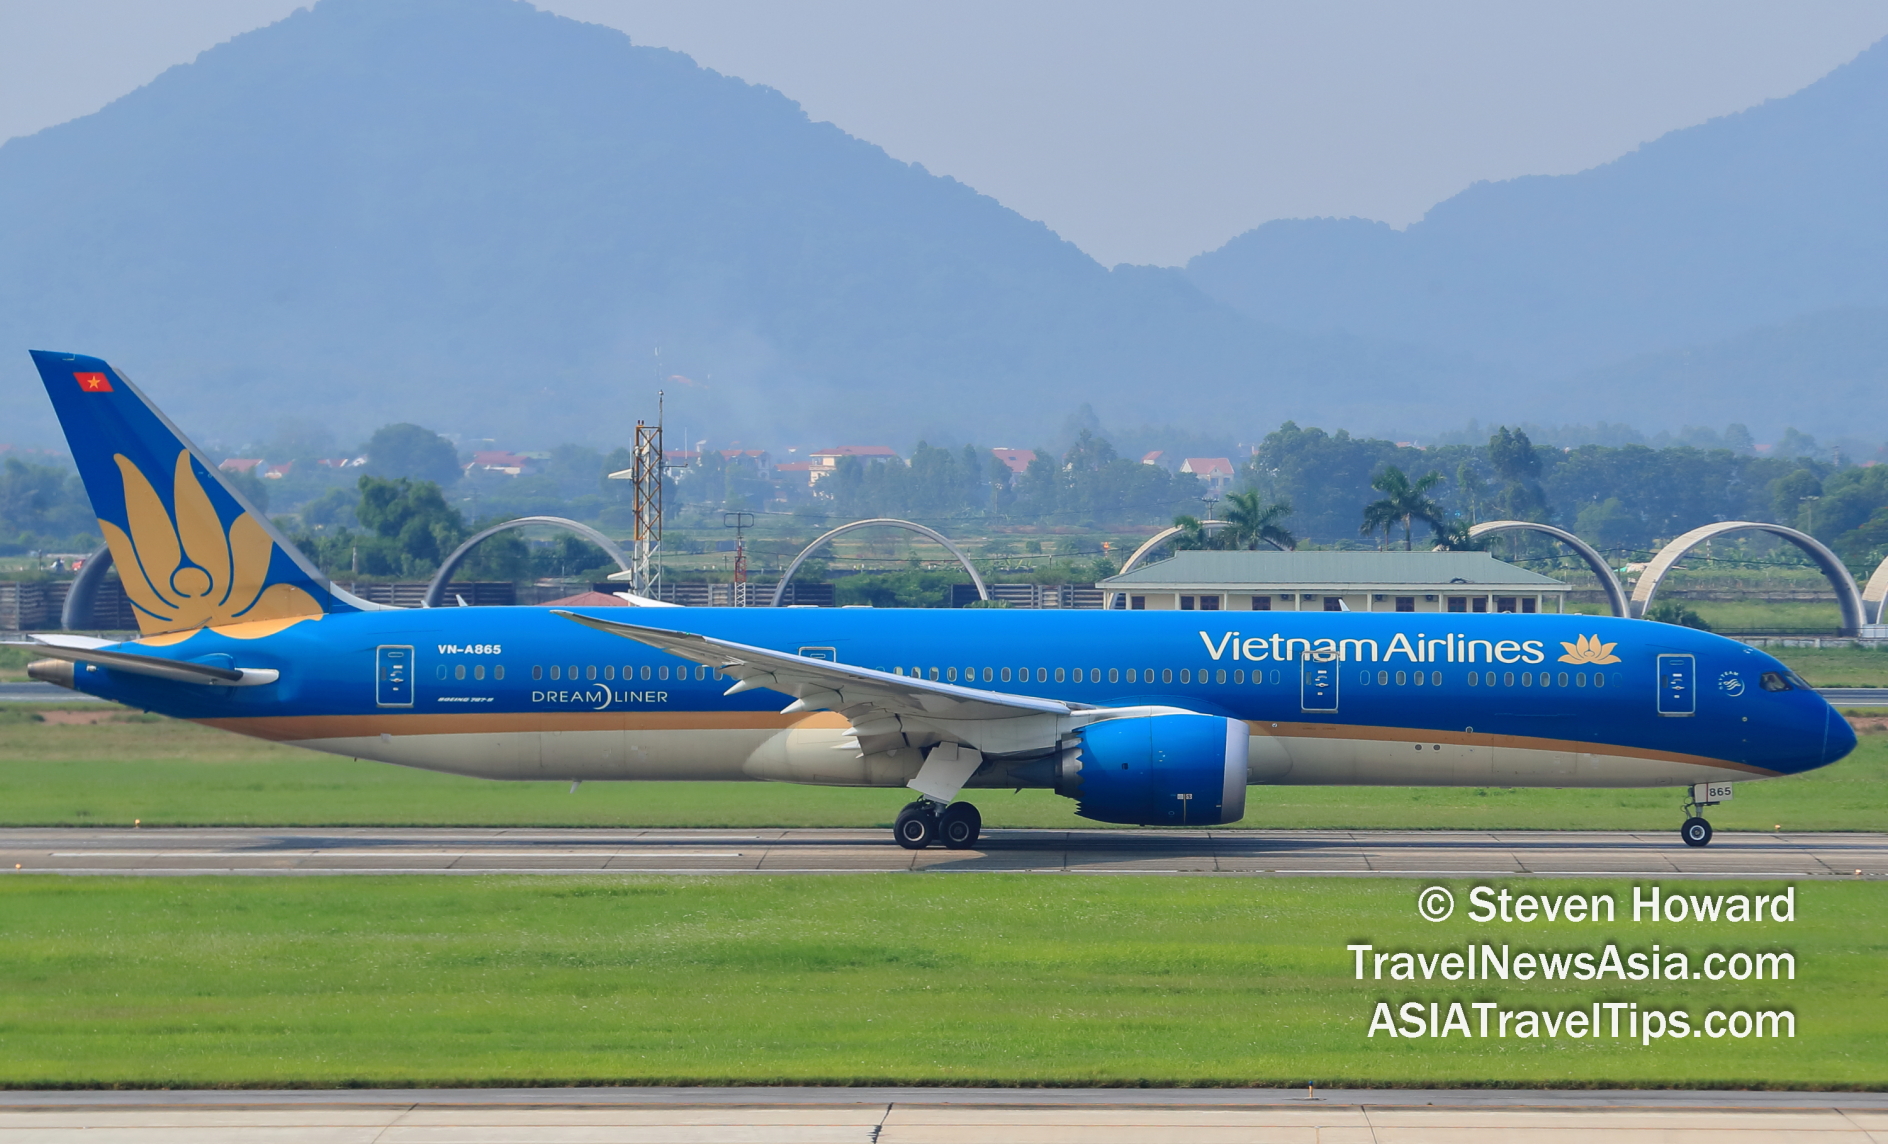 Vietnam Airlines B787-8 reg: VN-A865. Picture by Steven Howard of TravelNewsAsia.com Click to enlarge.